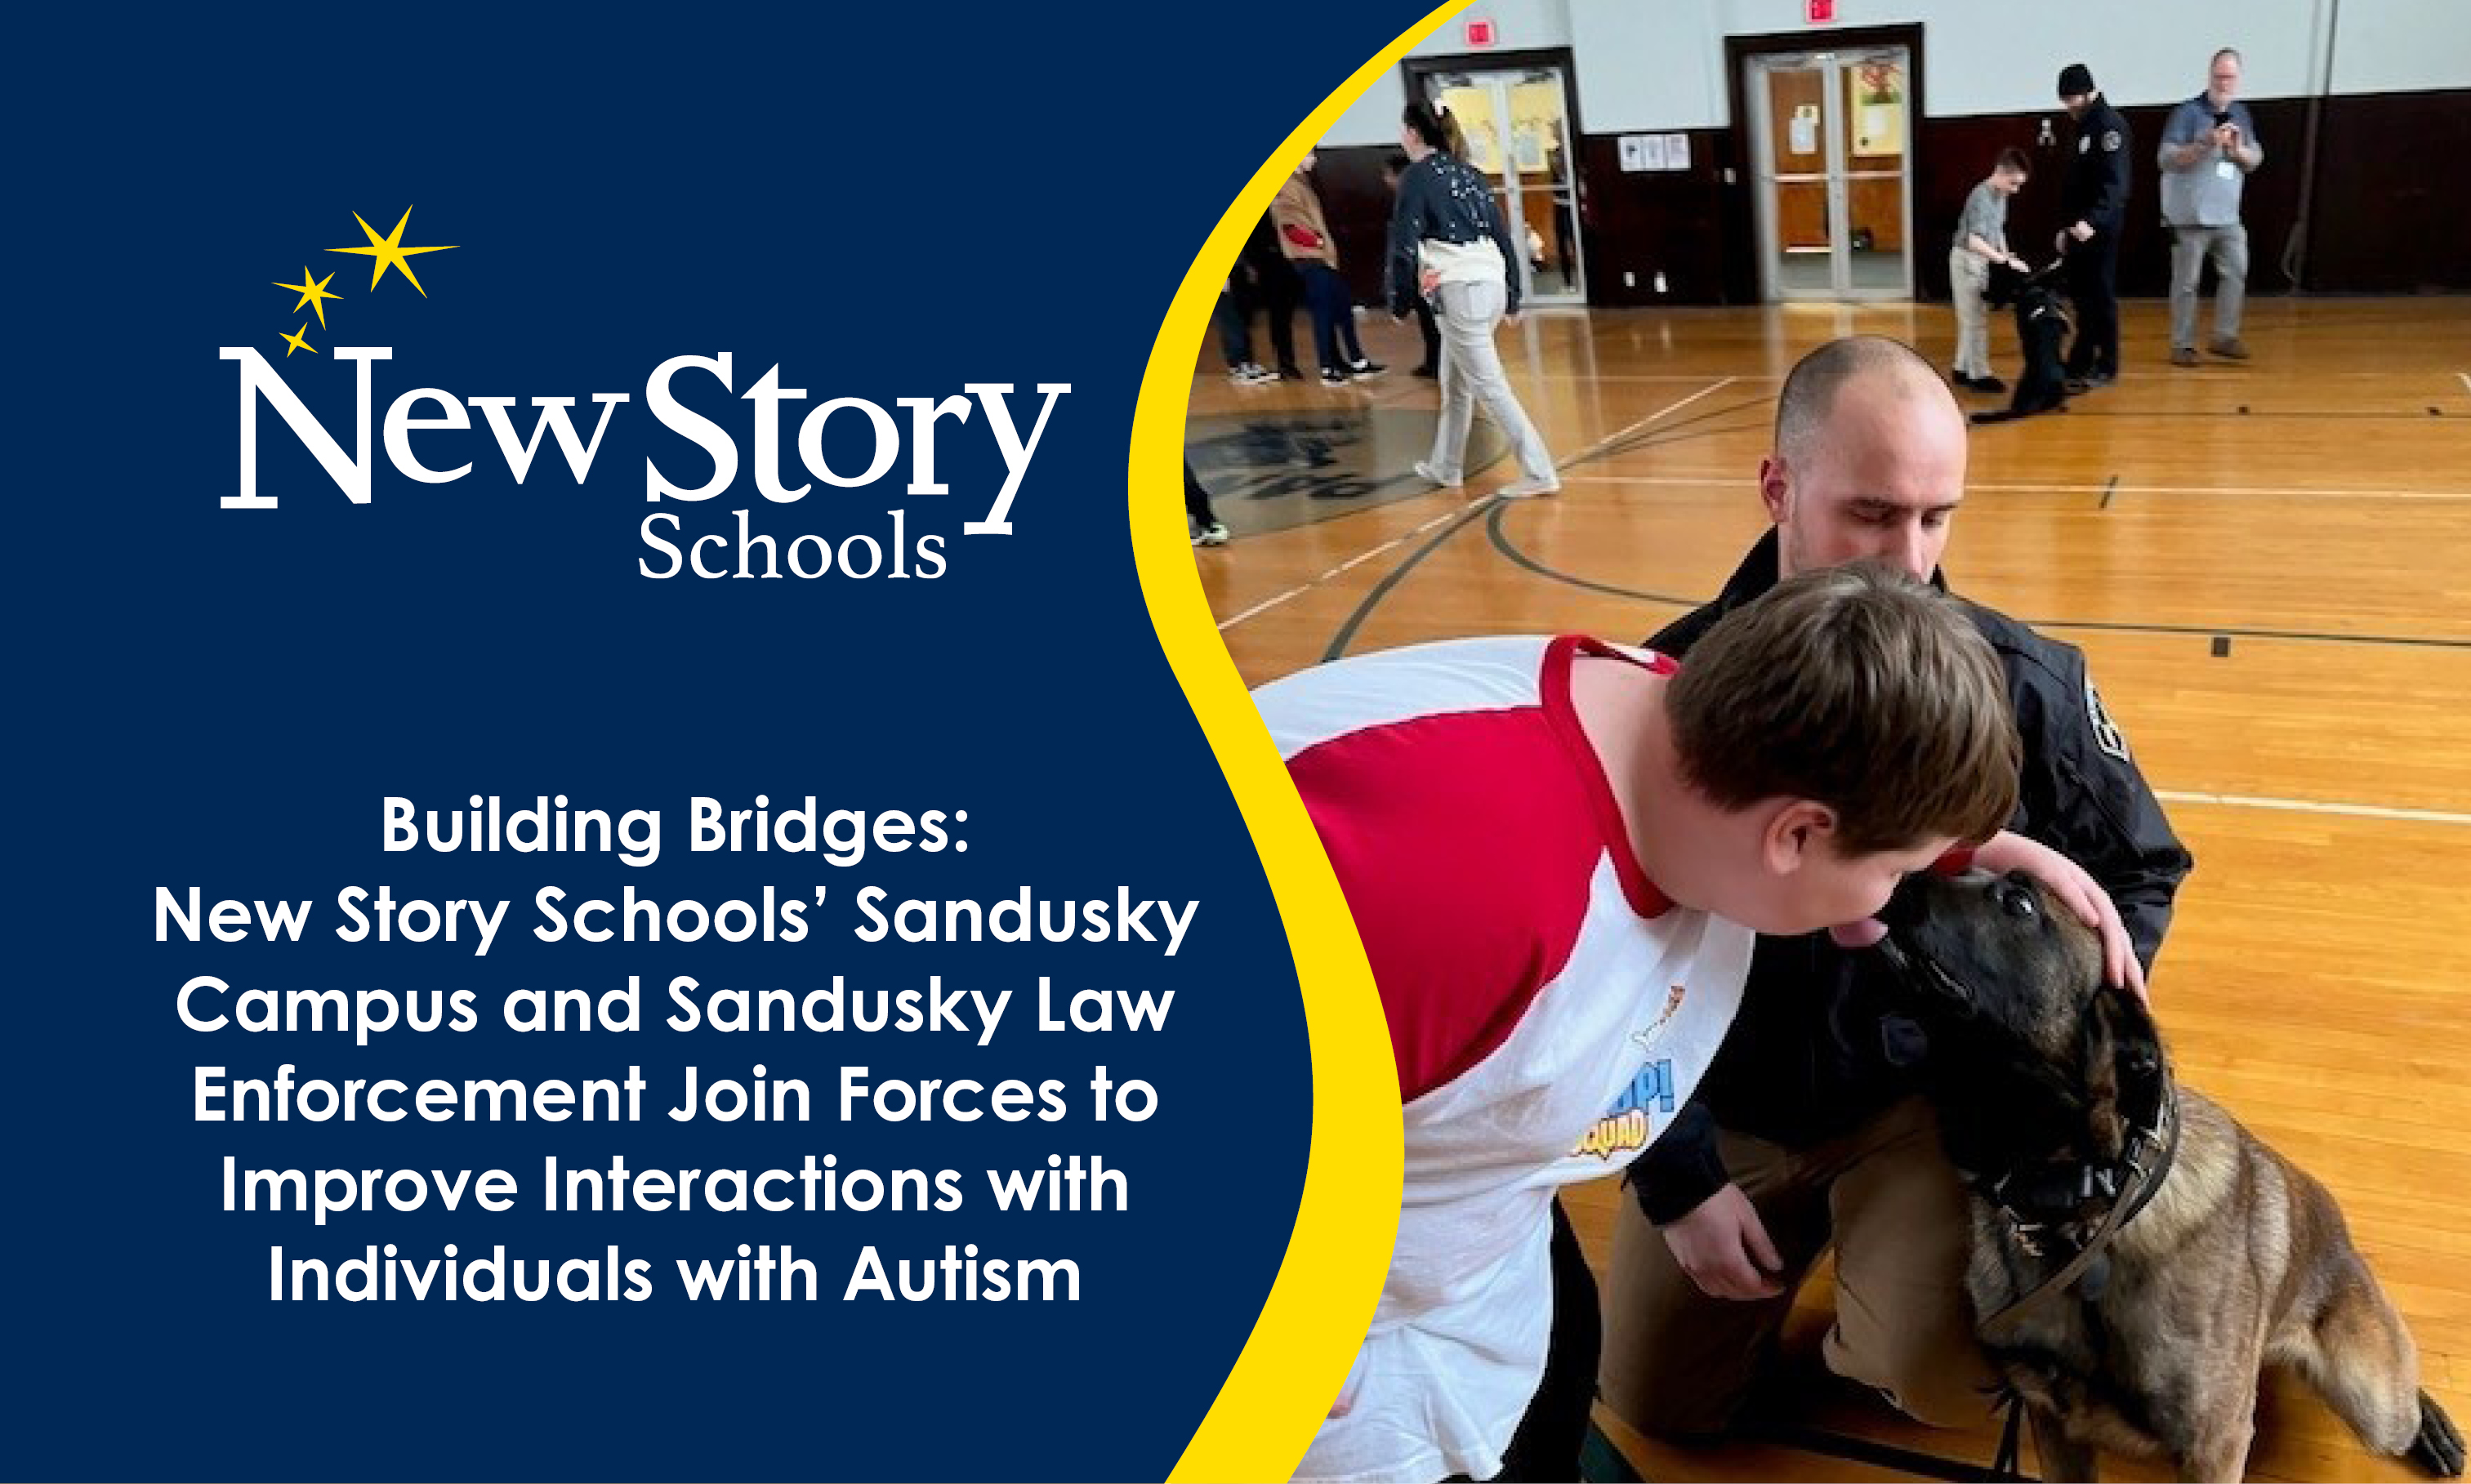 Building Bridges: New Story Schools' Sandusky Campus and Sandusky Law Enforcement Join Forces to Improve Interactions with Individuals with Autism